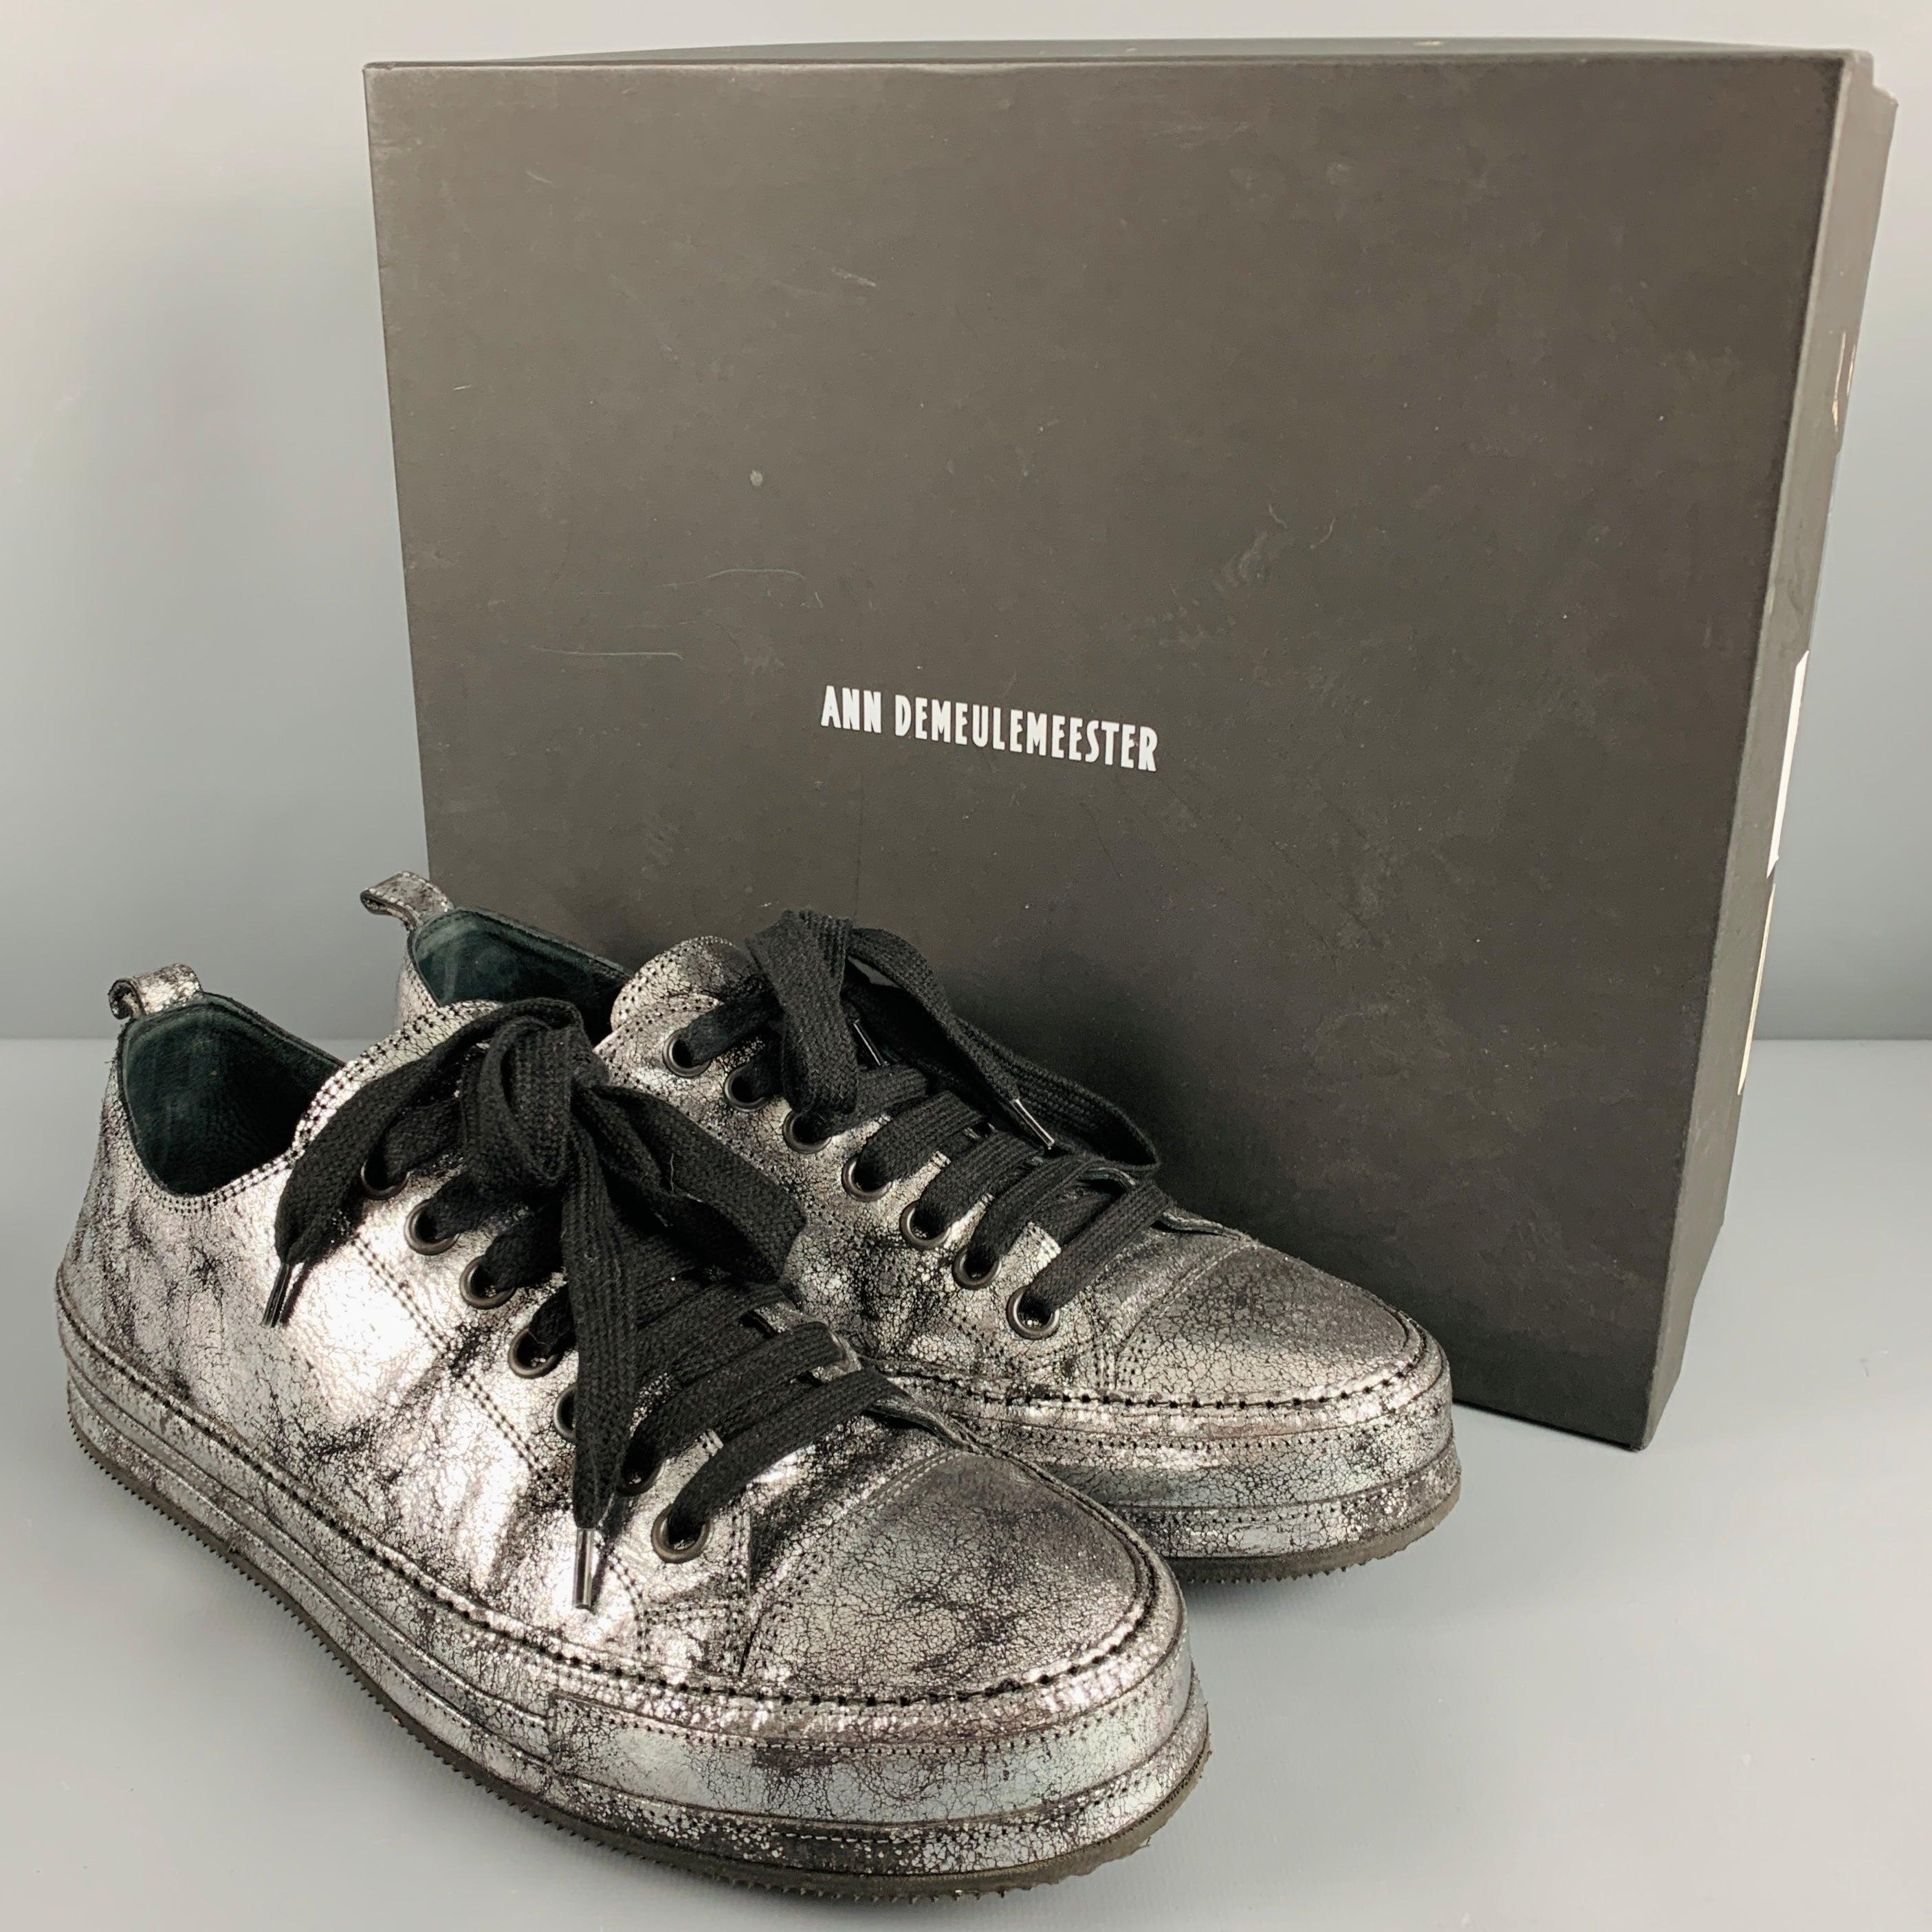 ANN DEMEULEMEESTER Taille 9 Silver Black Metallic Leather Lace Up Sneakers en vente 3